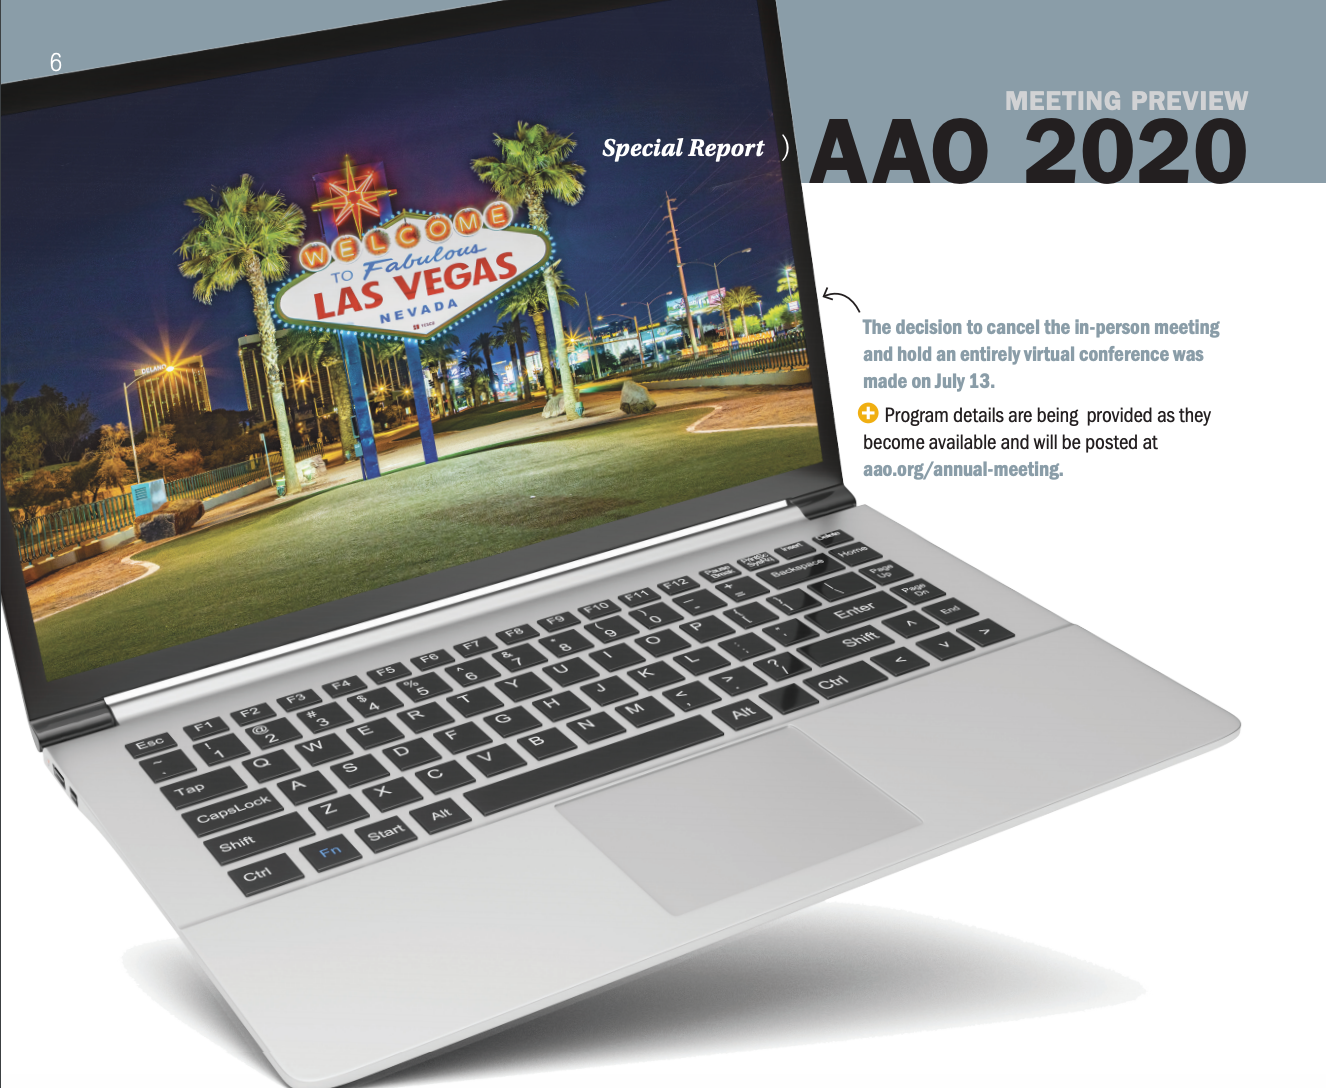  Subspecialty Day 2020 and the annual meeting of the American Academy of Ophthalmology (AAO) are going virtual this year. 